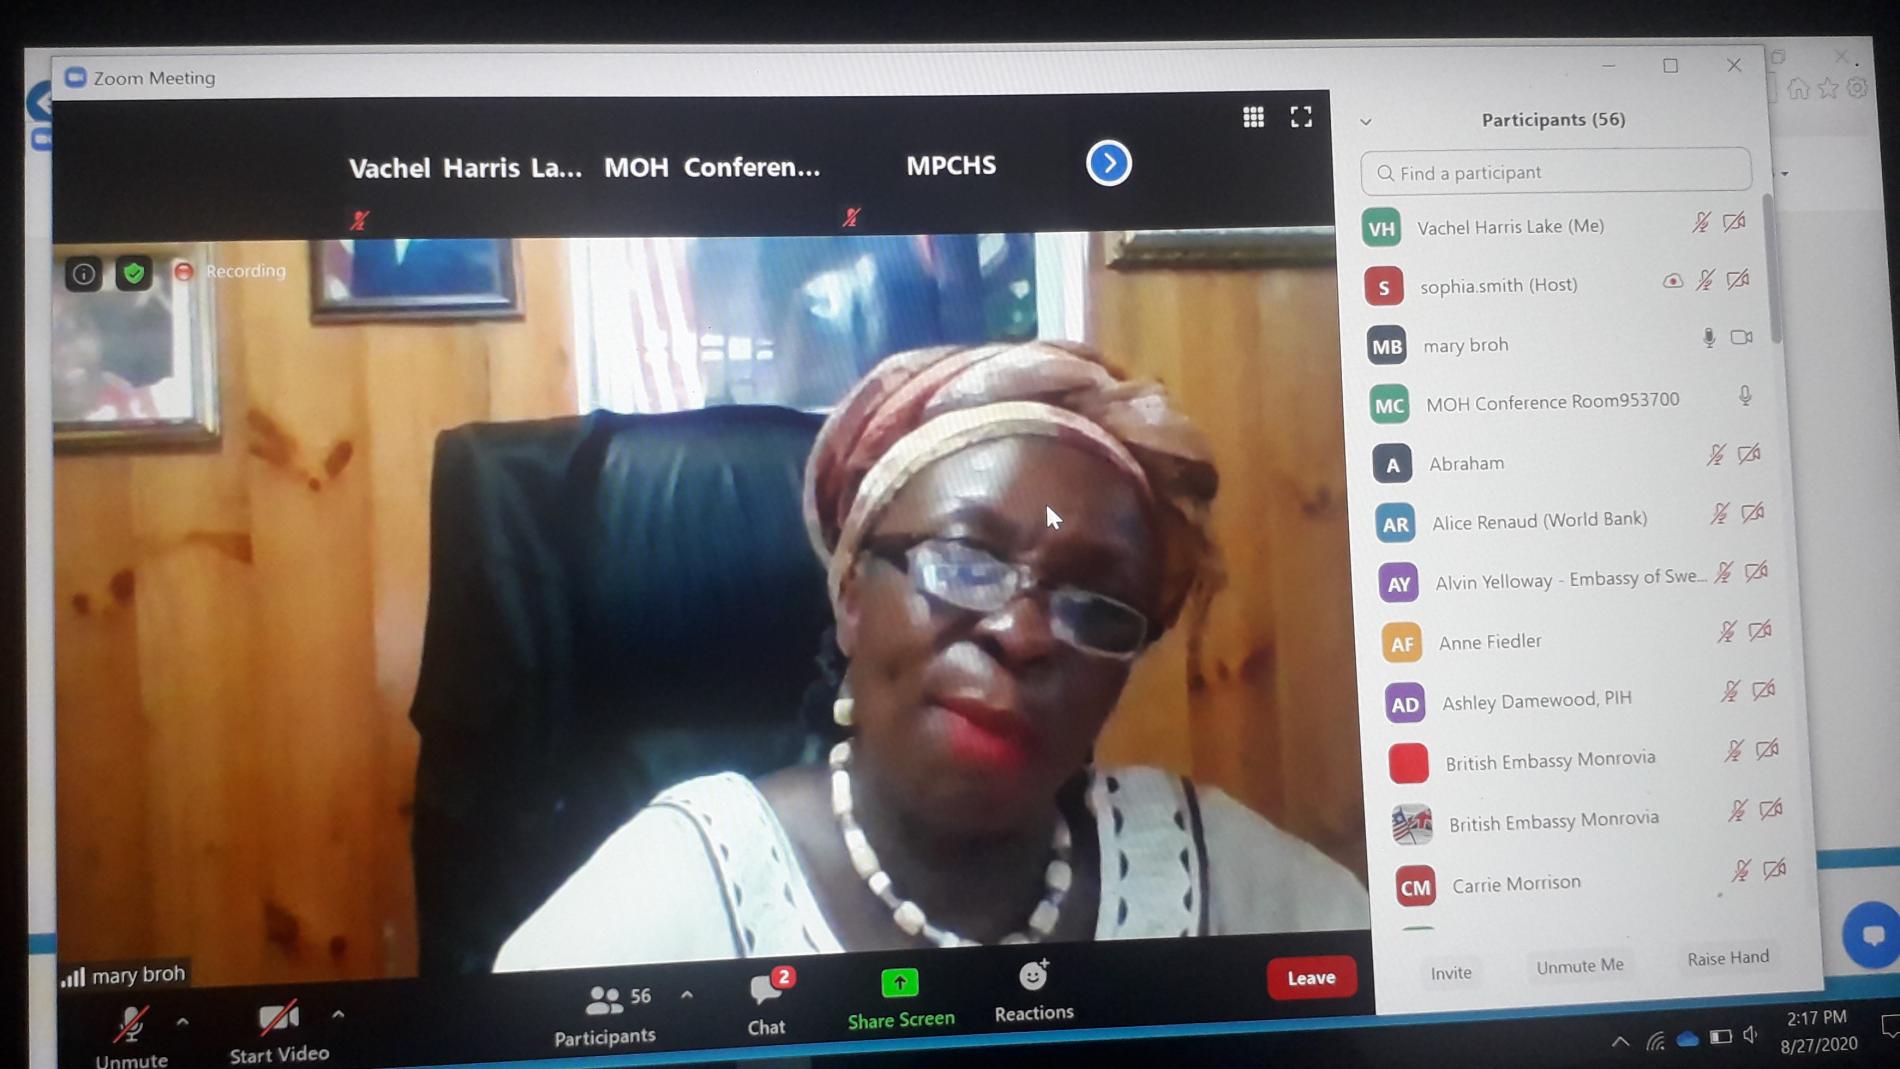 Madame Mary Broh, National COVID-19 Response Coordinator